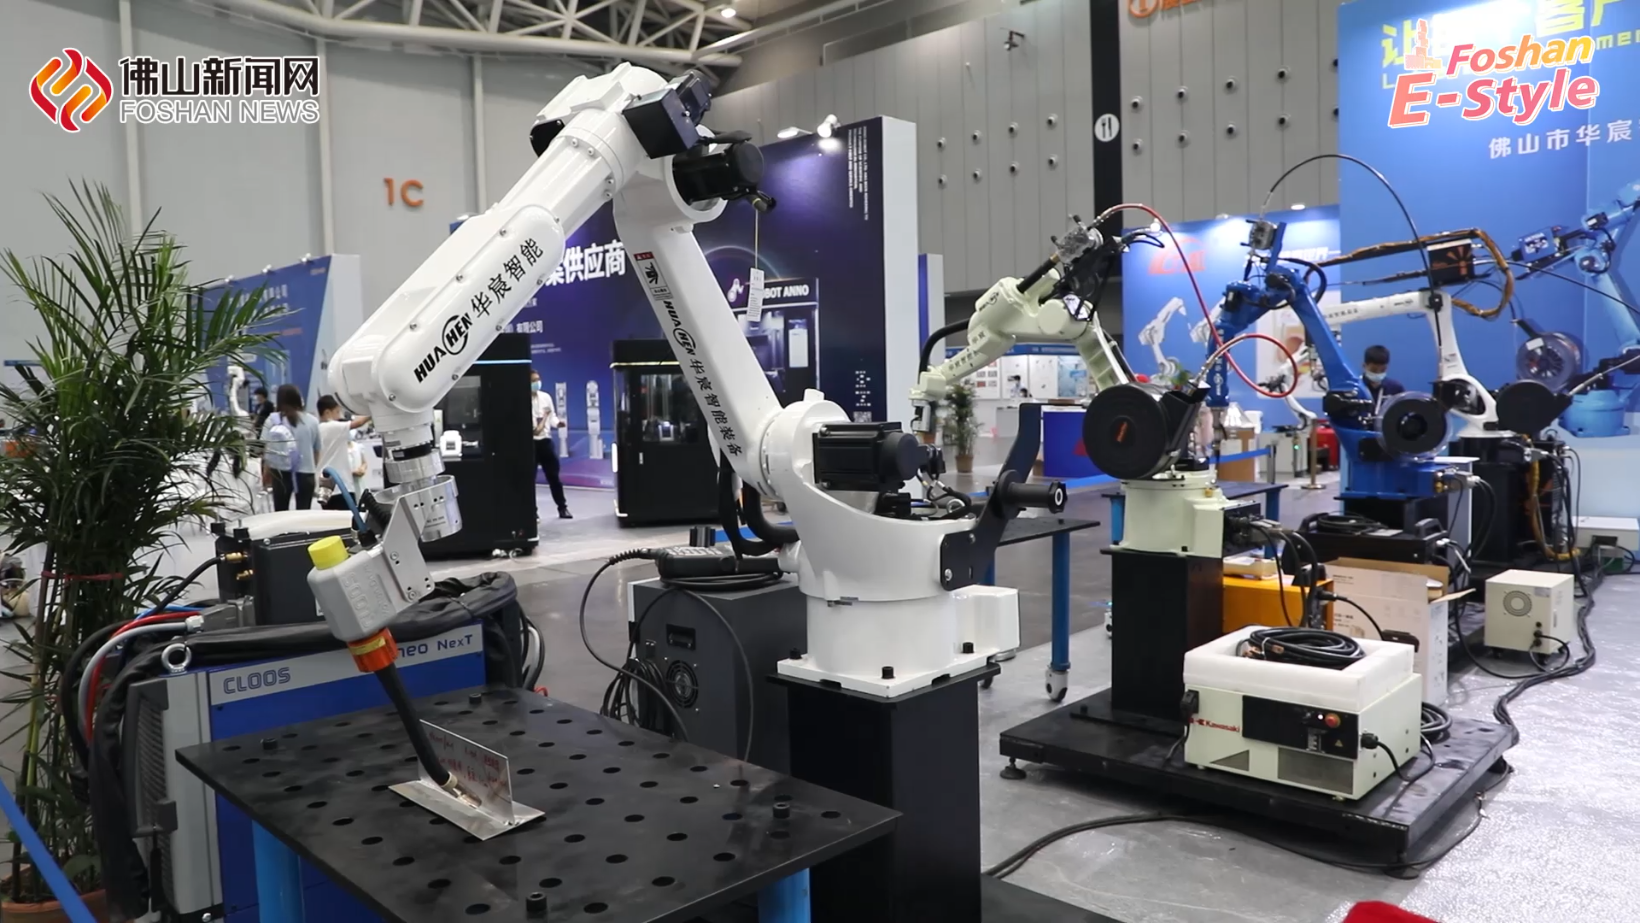 The most advanced robots debut in Foshan!